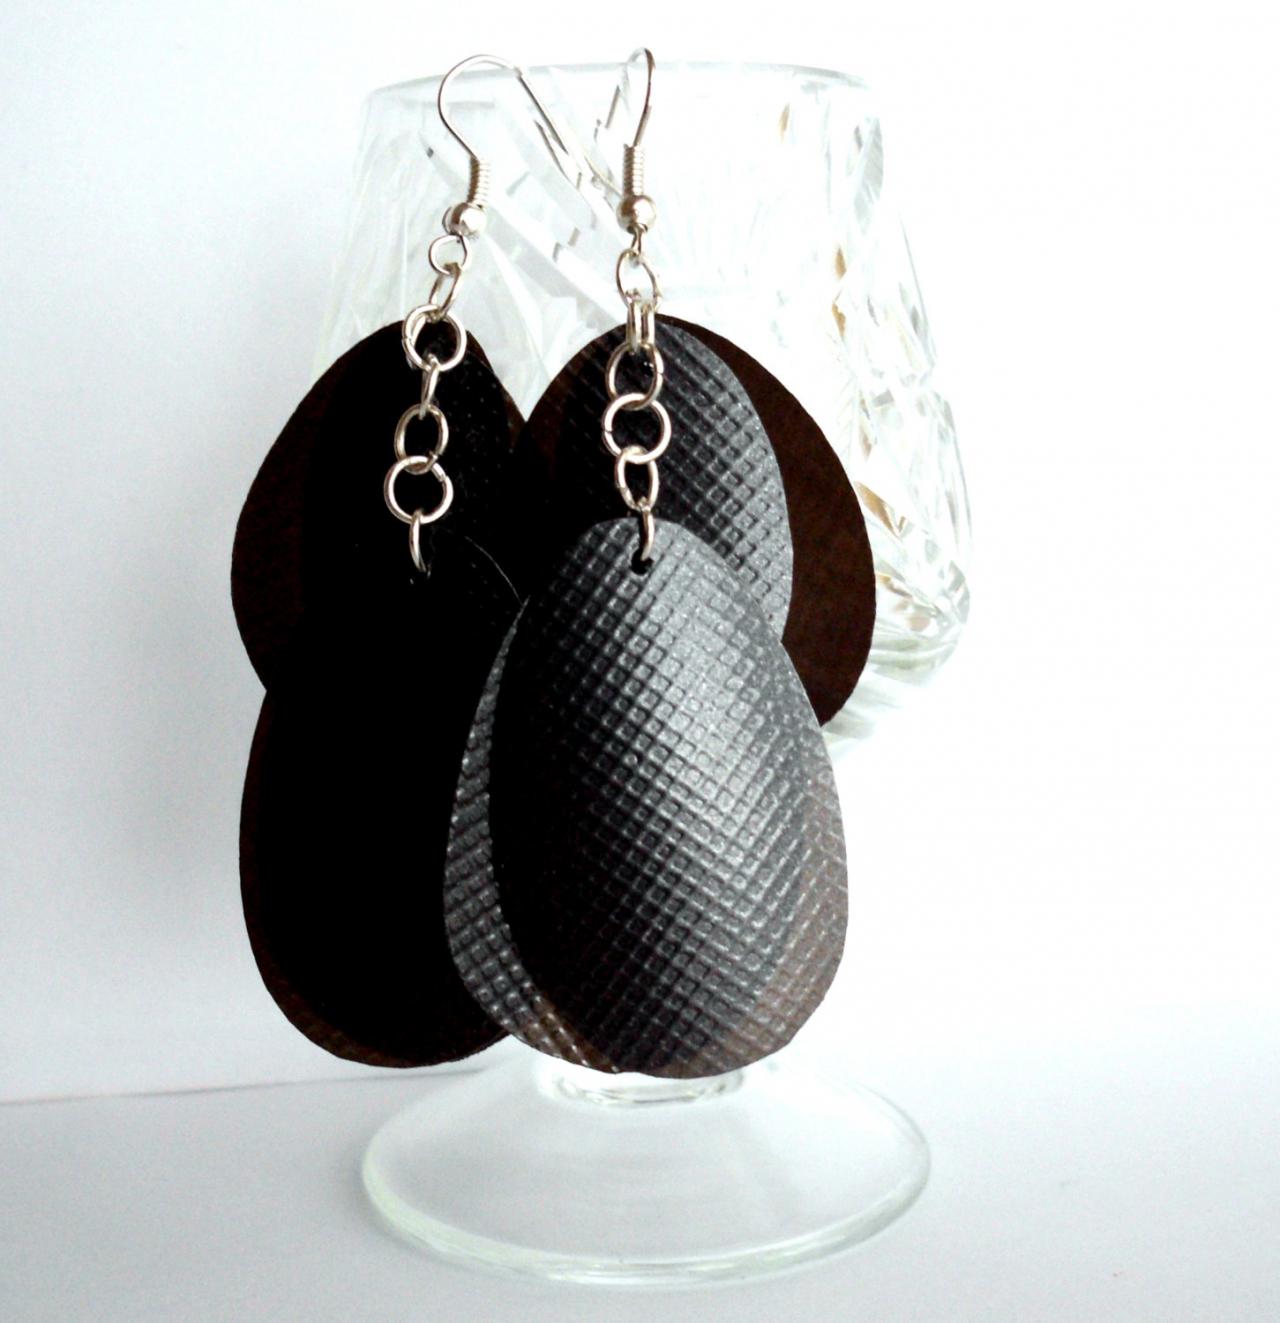 Upcycled Jewelry: Black Long Earrings Made Of Recycled Plastic Bottle, Eco-friendly, Rock, Goth, Modern, Sustainable